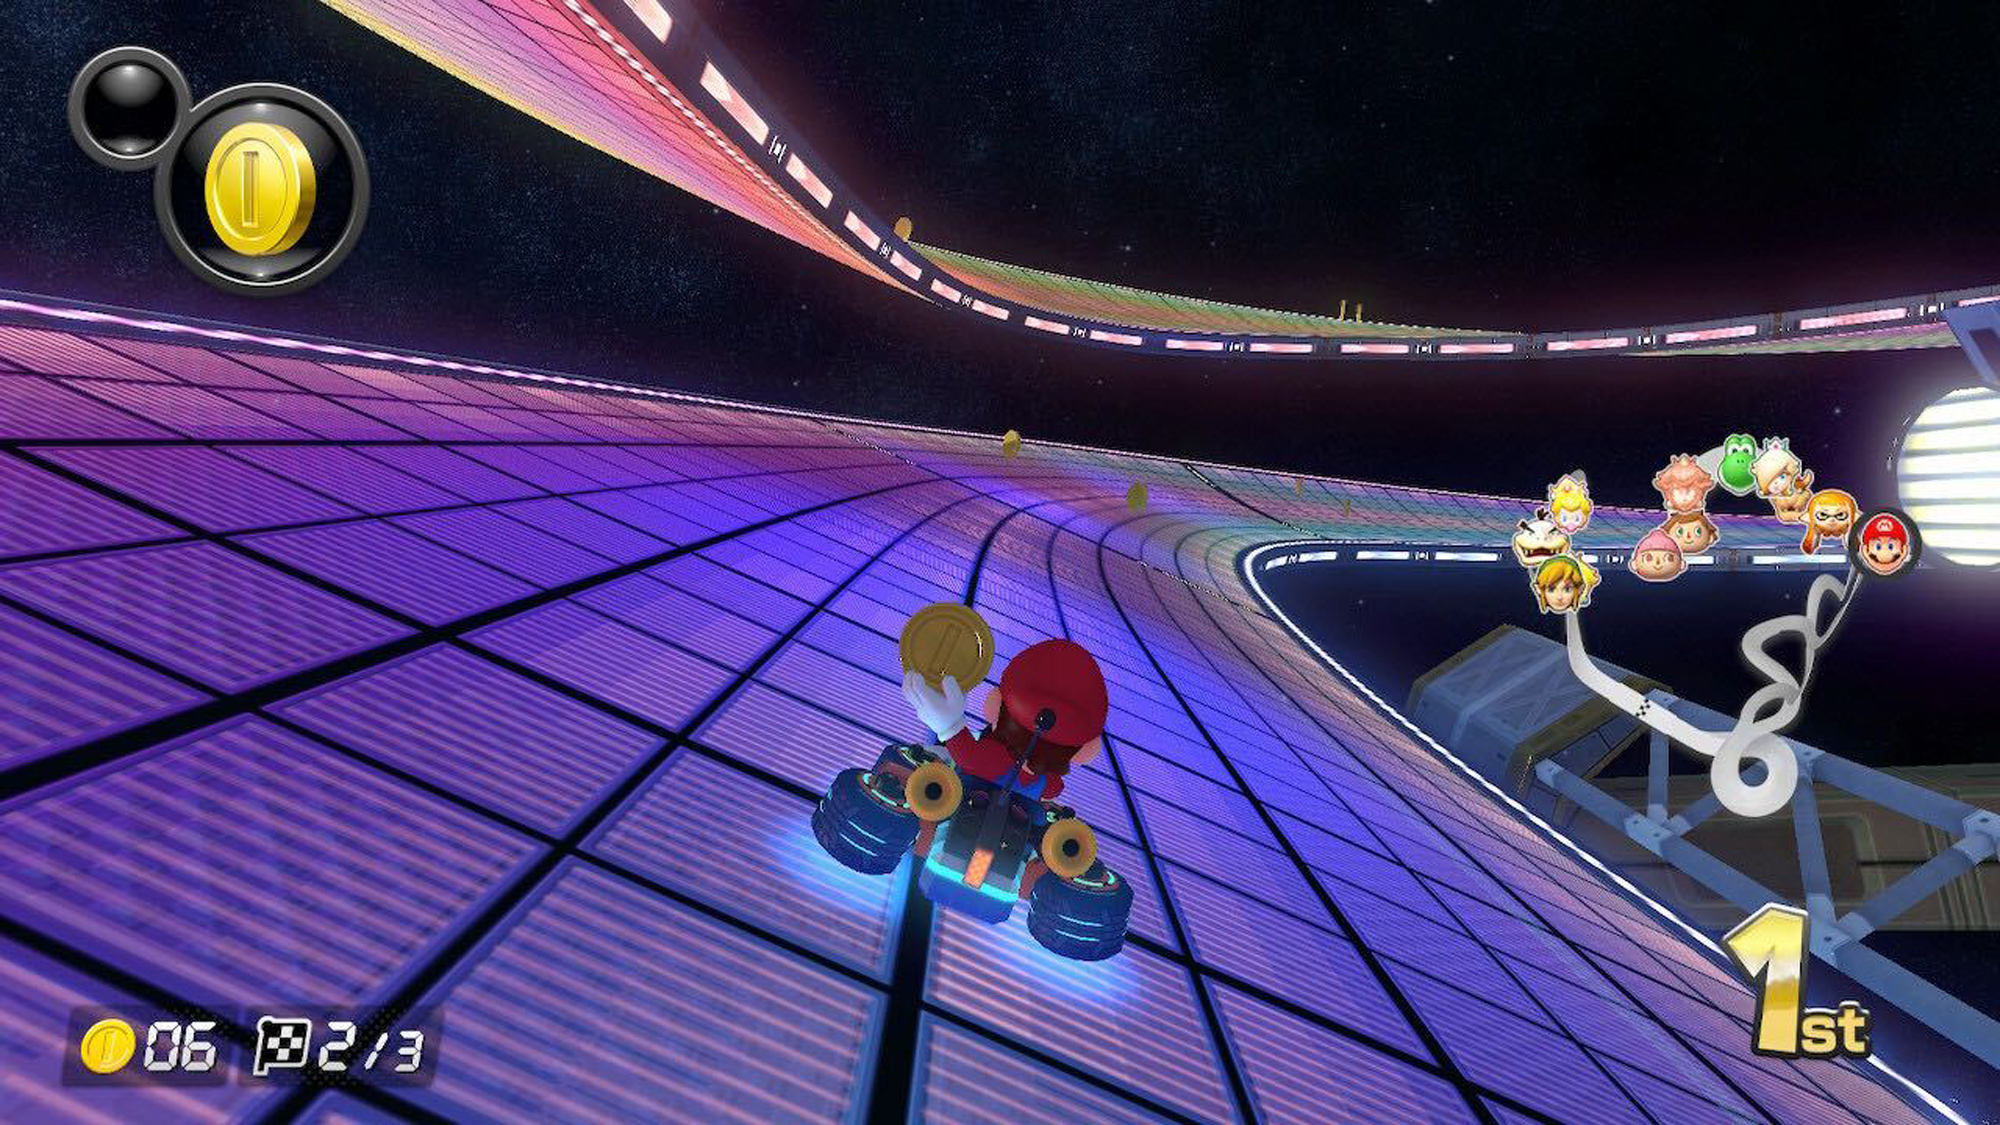 A photo of Mario Kart. Mario is visible in his kart holding a coin on the Rainbow Road level.